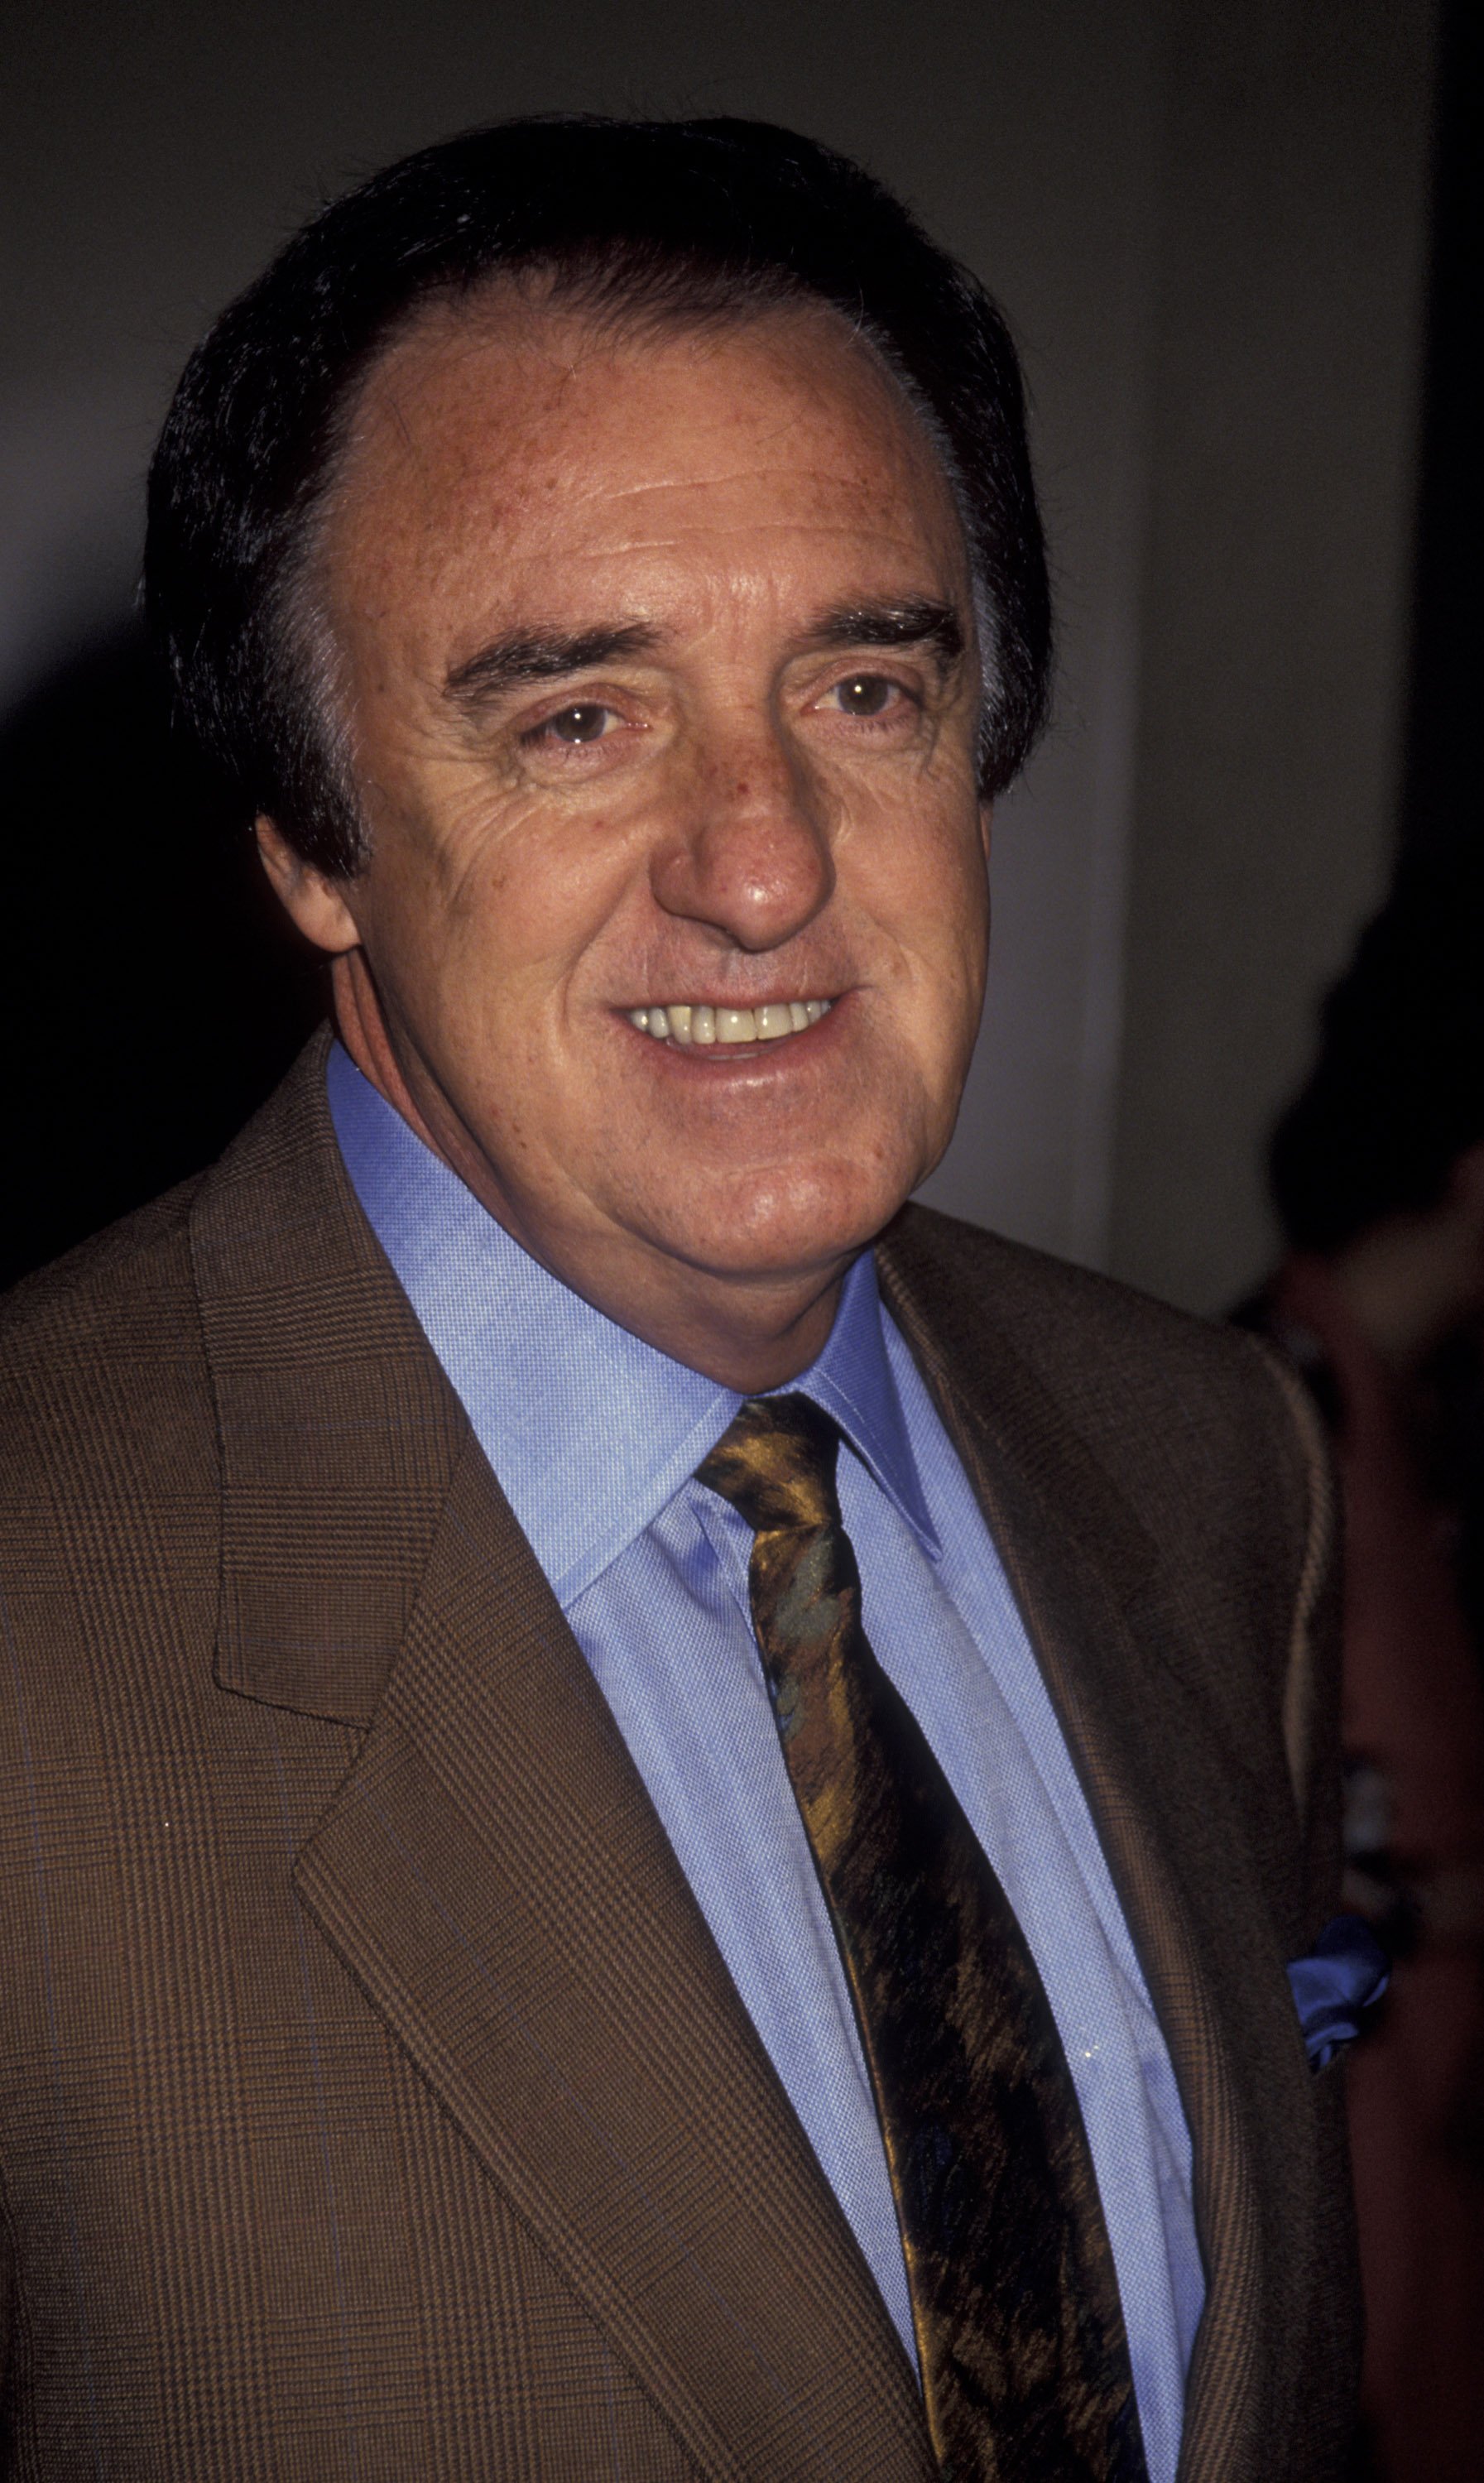 Jim Nabors attending Professional Dancers Society Gypsy Awards Luncheon on February 3, 1991 at the Beverly Hilton Hotel in Beverly Hills, California. | Source: Getty Images